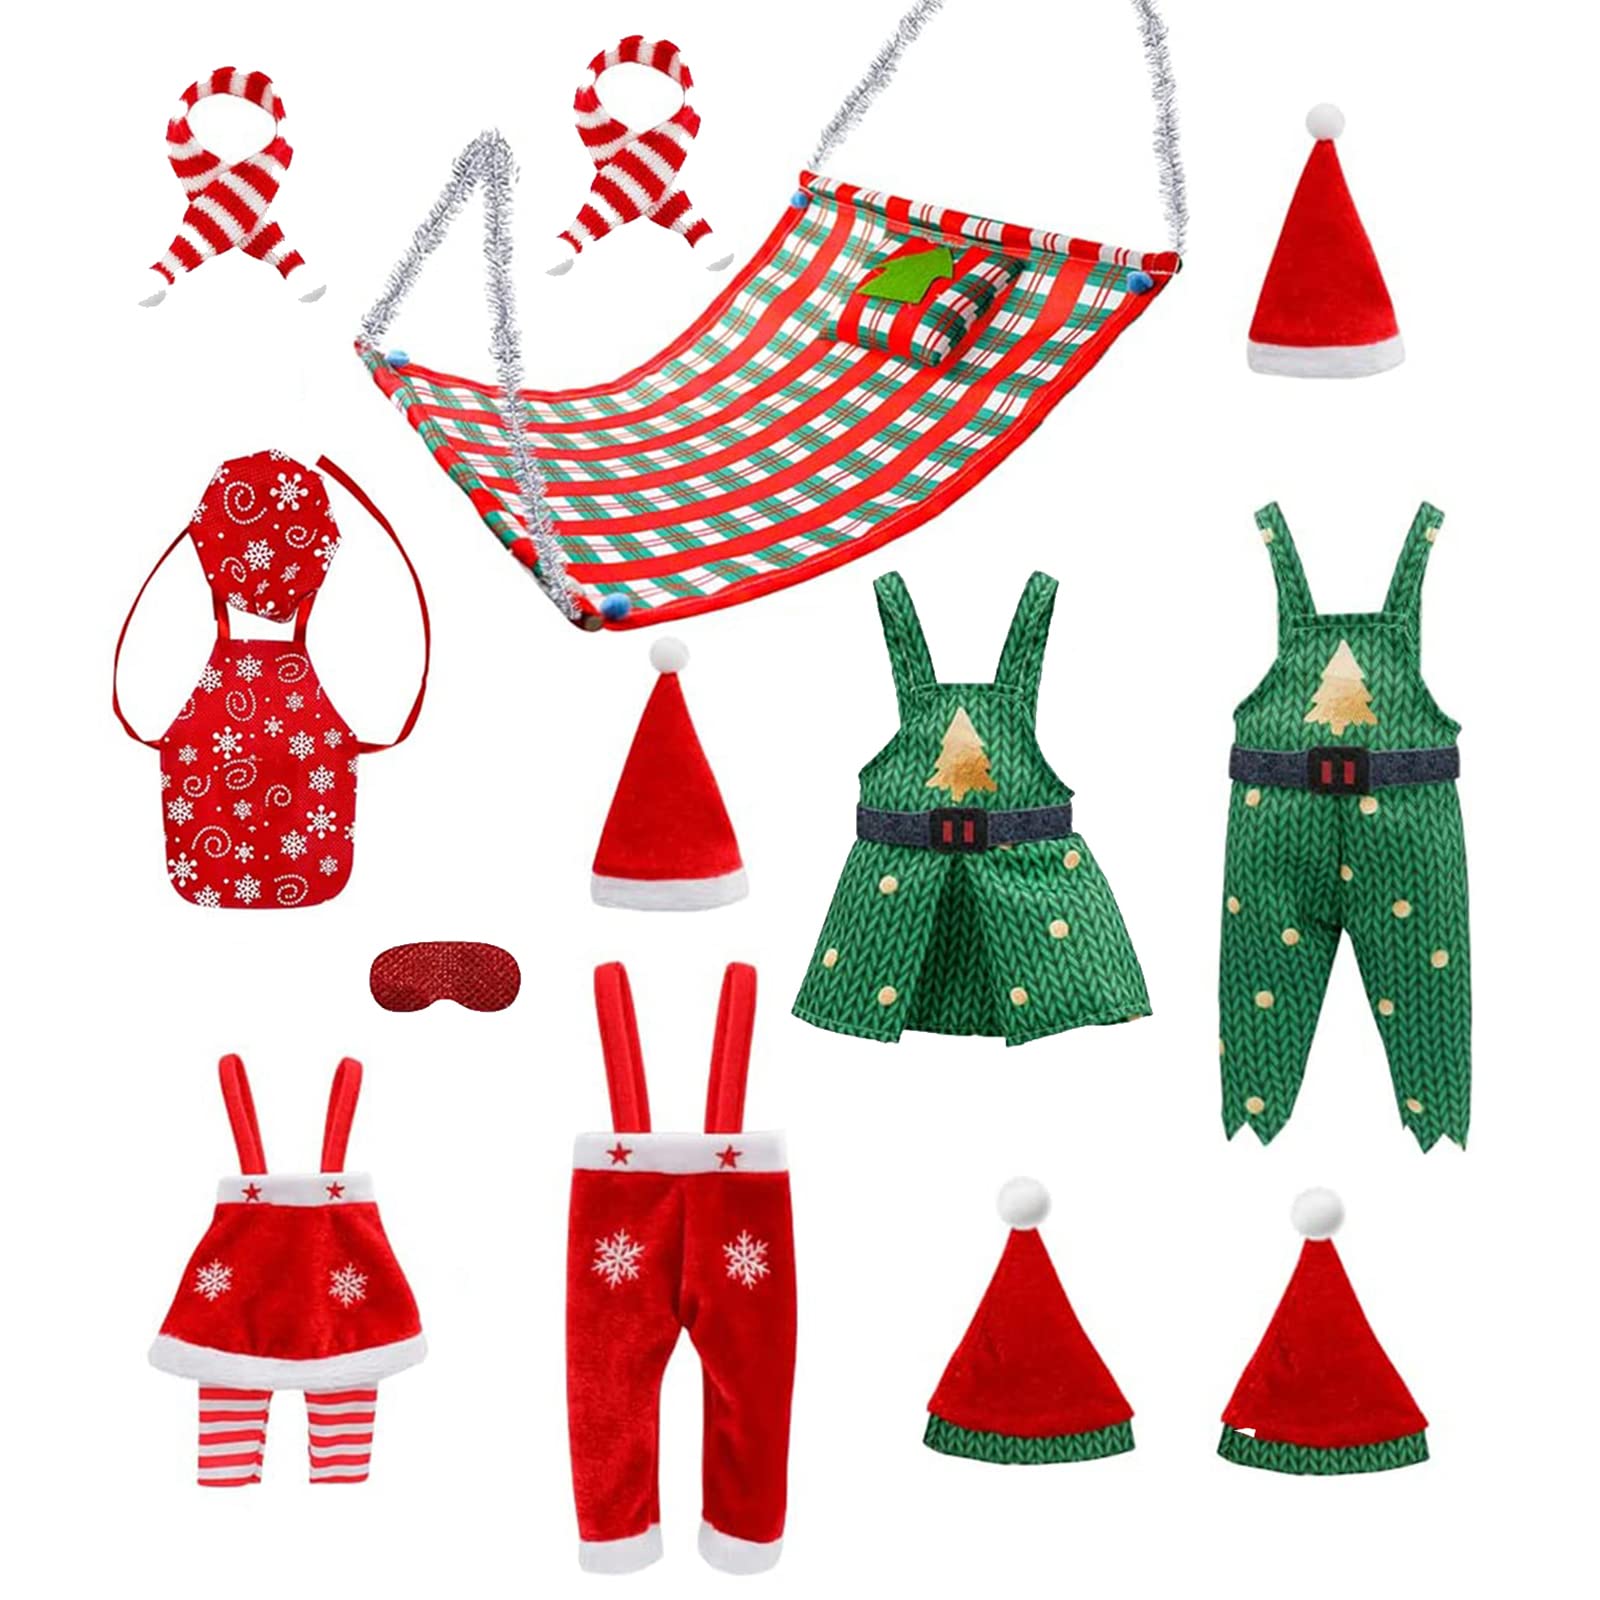 Elf Accessories Clothes for Girls,Christmas Elf Pro Kit Include Elf Skirt Outfit Dress Santa Cloth for 12 Inch Doll